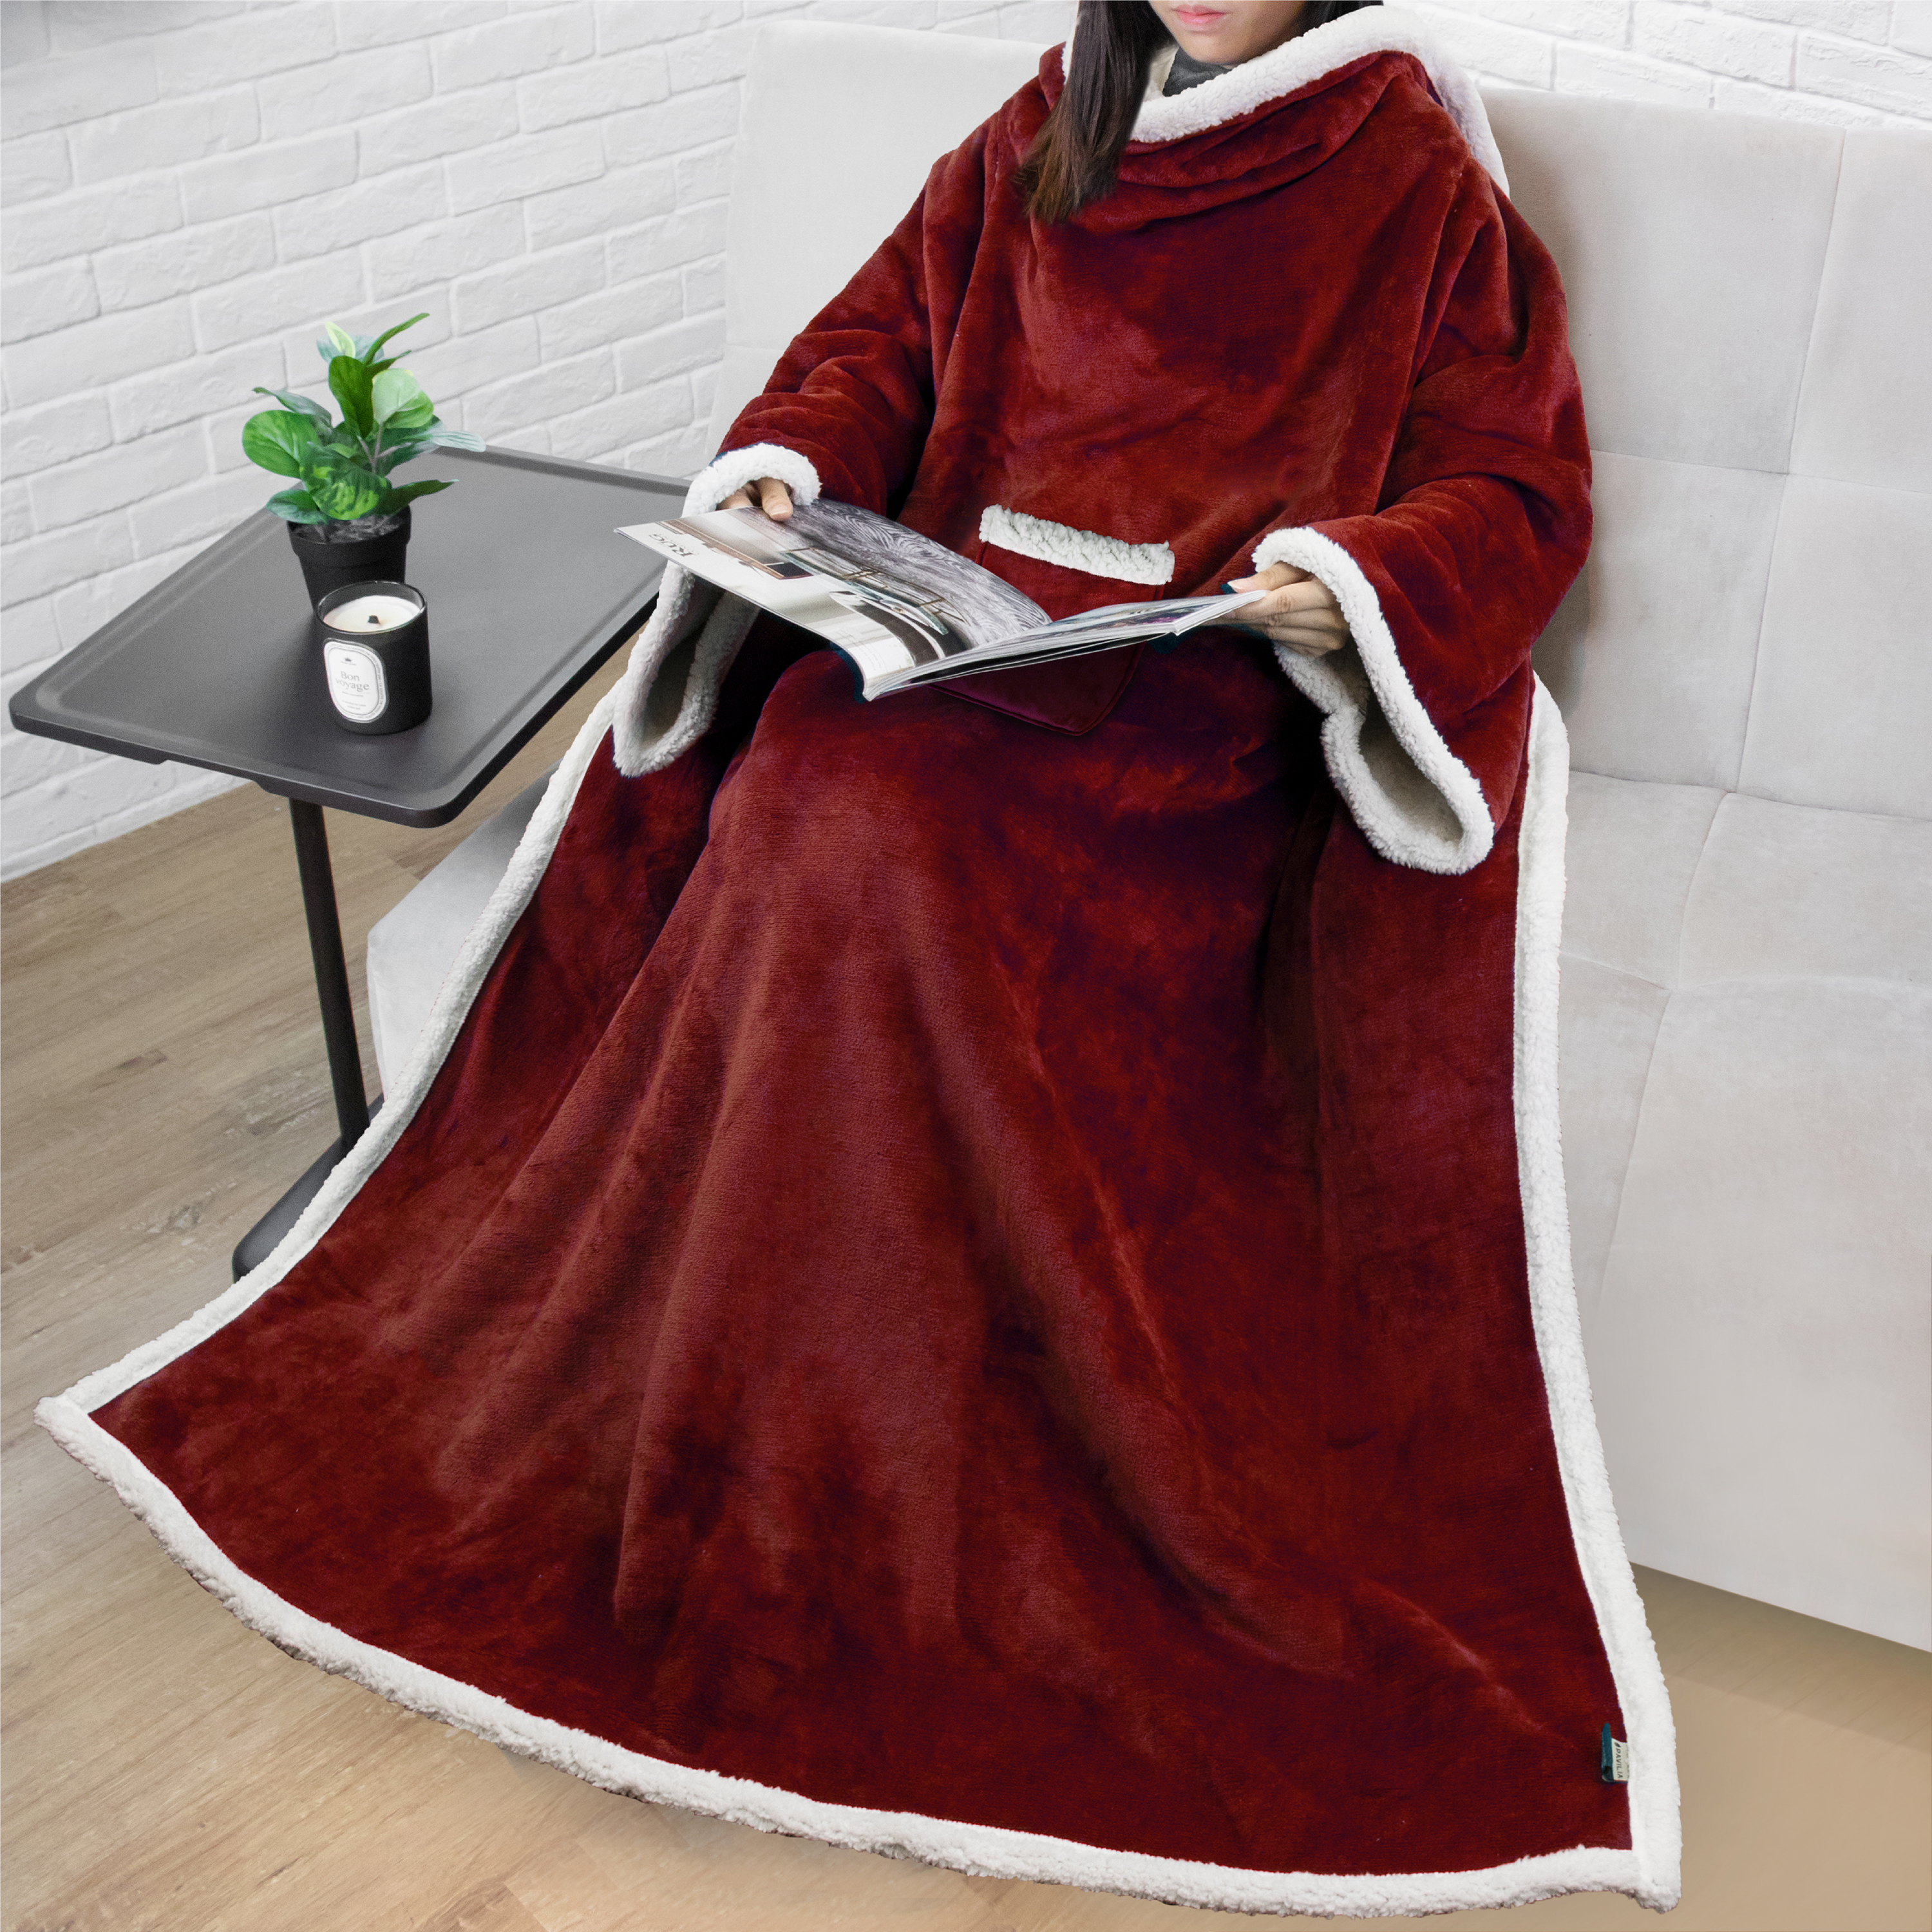 Fleece Wearable Blanket with Sleeves and Kangaroo Pocket for Women Man  Adult, Super Soft Warm TV Throw Blanket with Snap Button, Body Wrap Robe